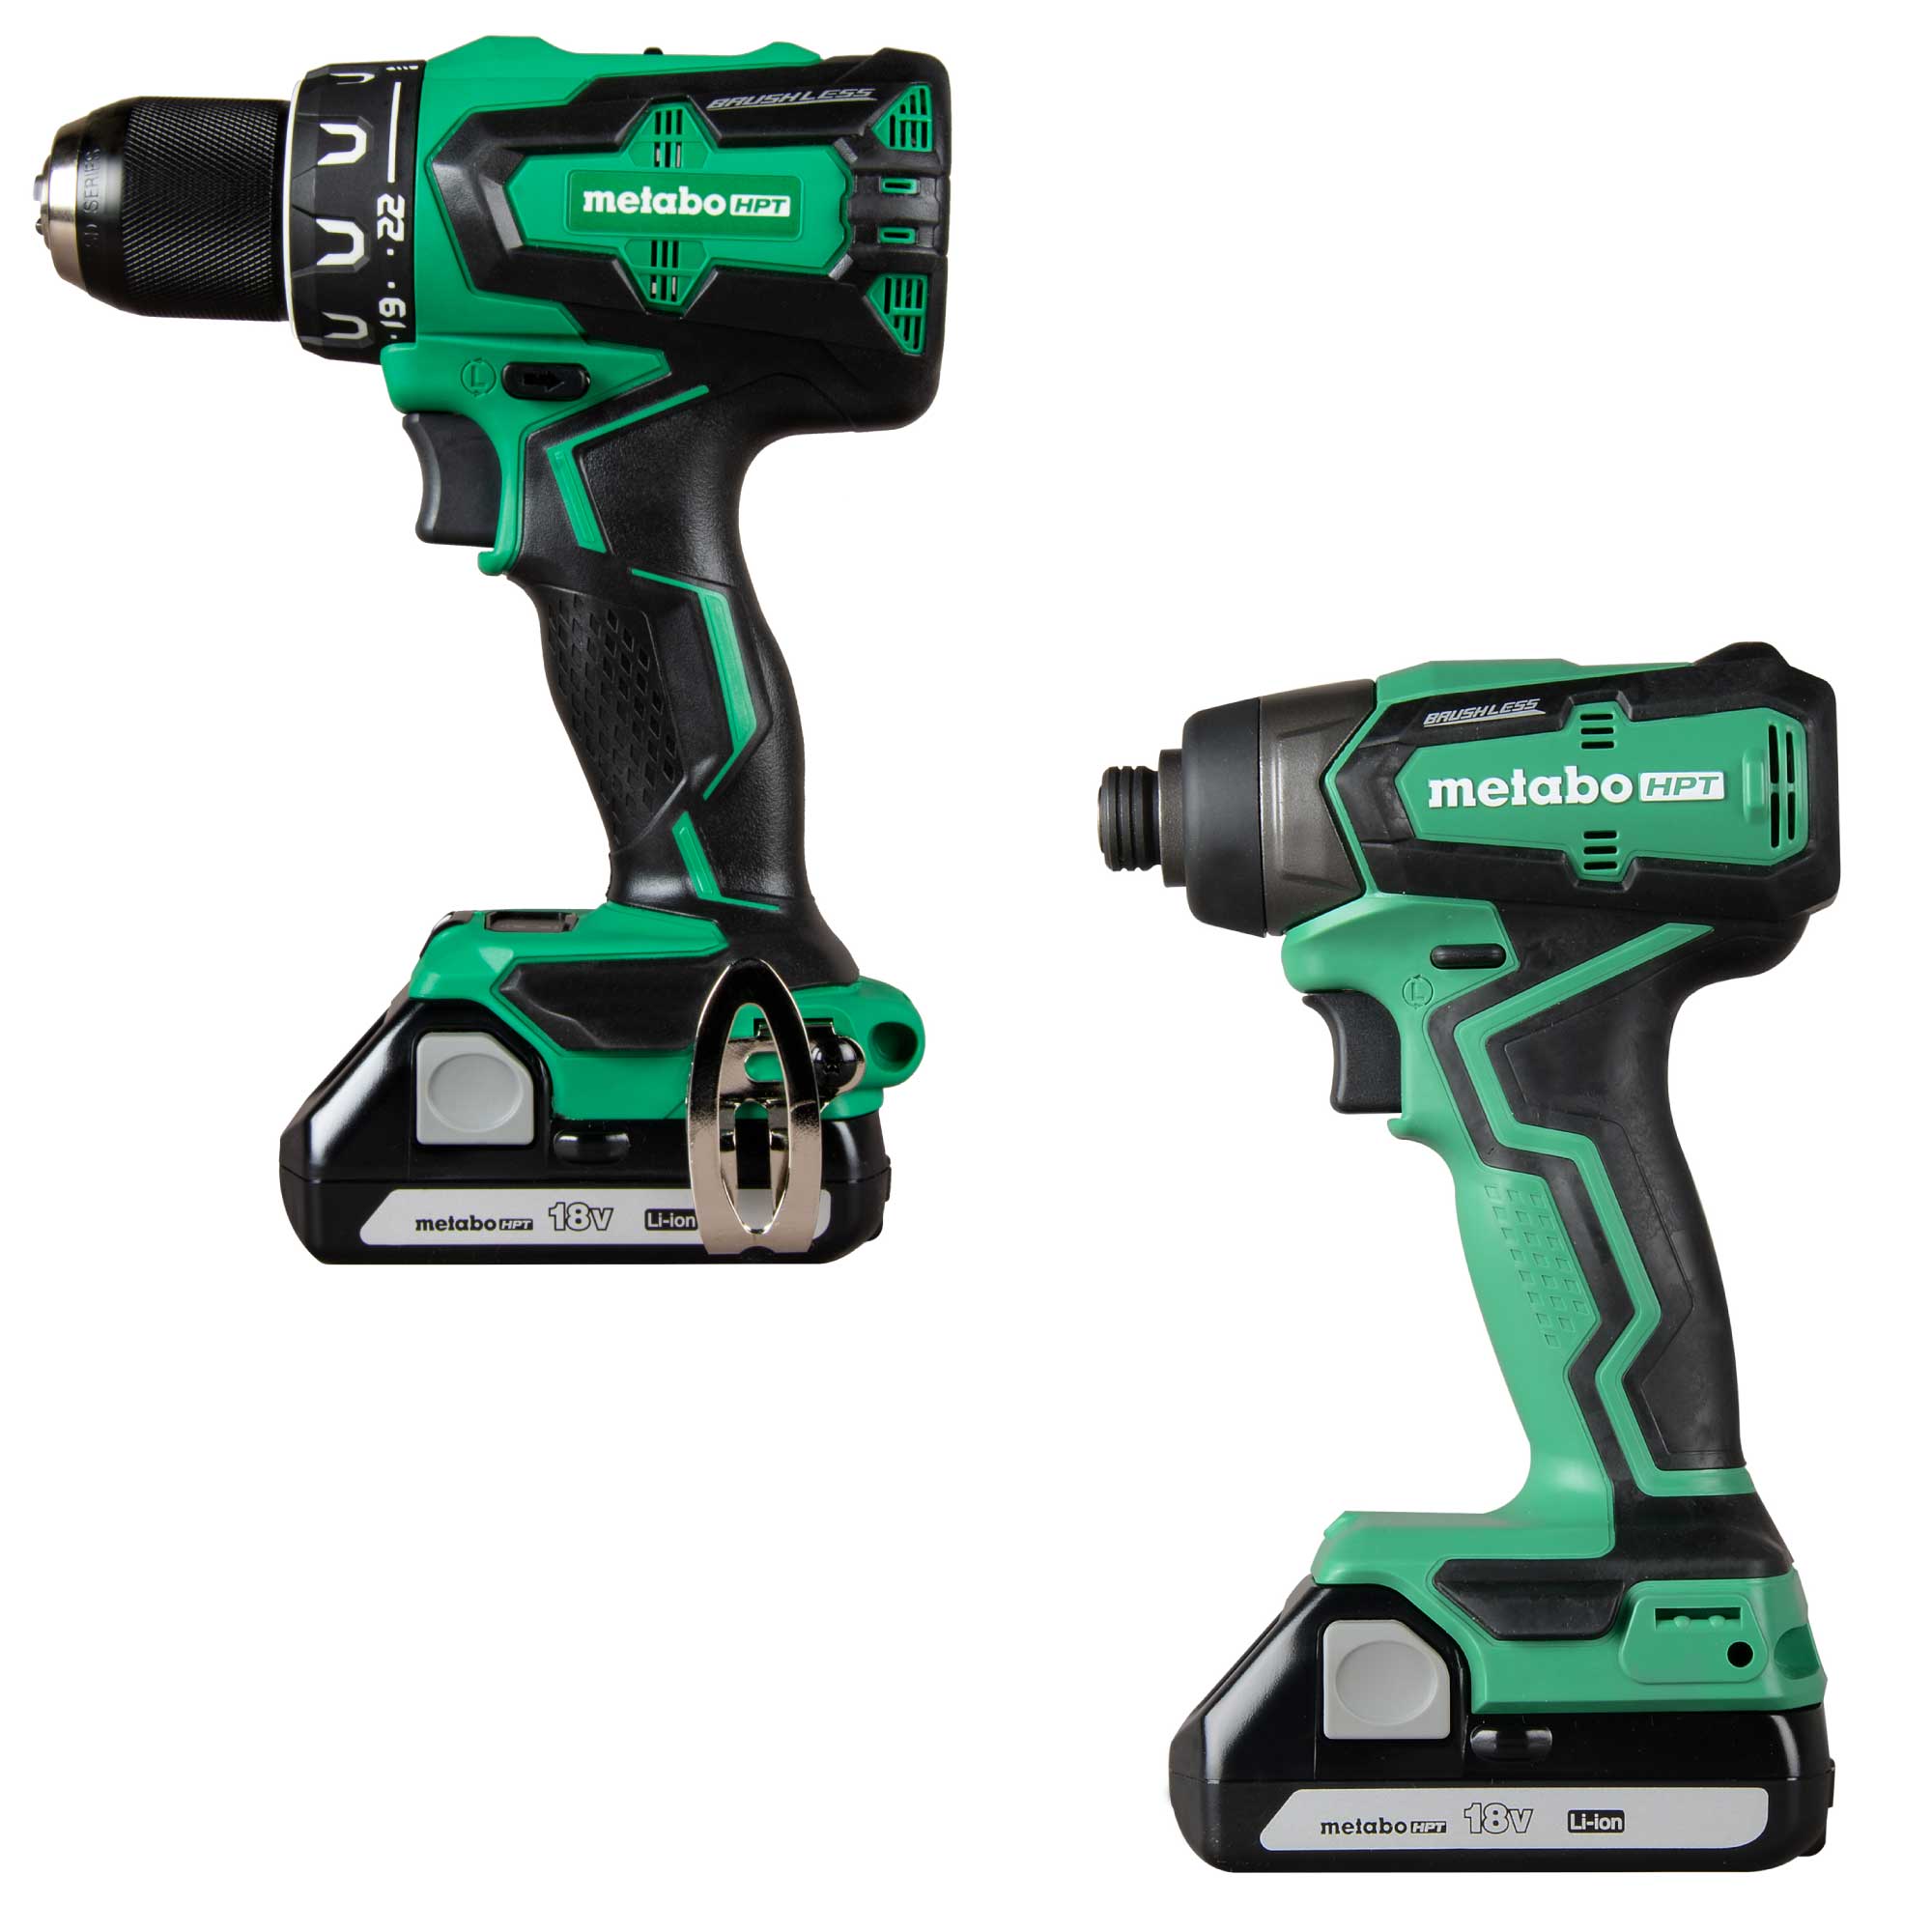 Metabo HPT MultiVolt 18-Volt 1/2-in Brushless Cordless Drill (2-batteries included and charger included) with MultiVolt 18-volt 1/4-in Variable Speed